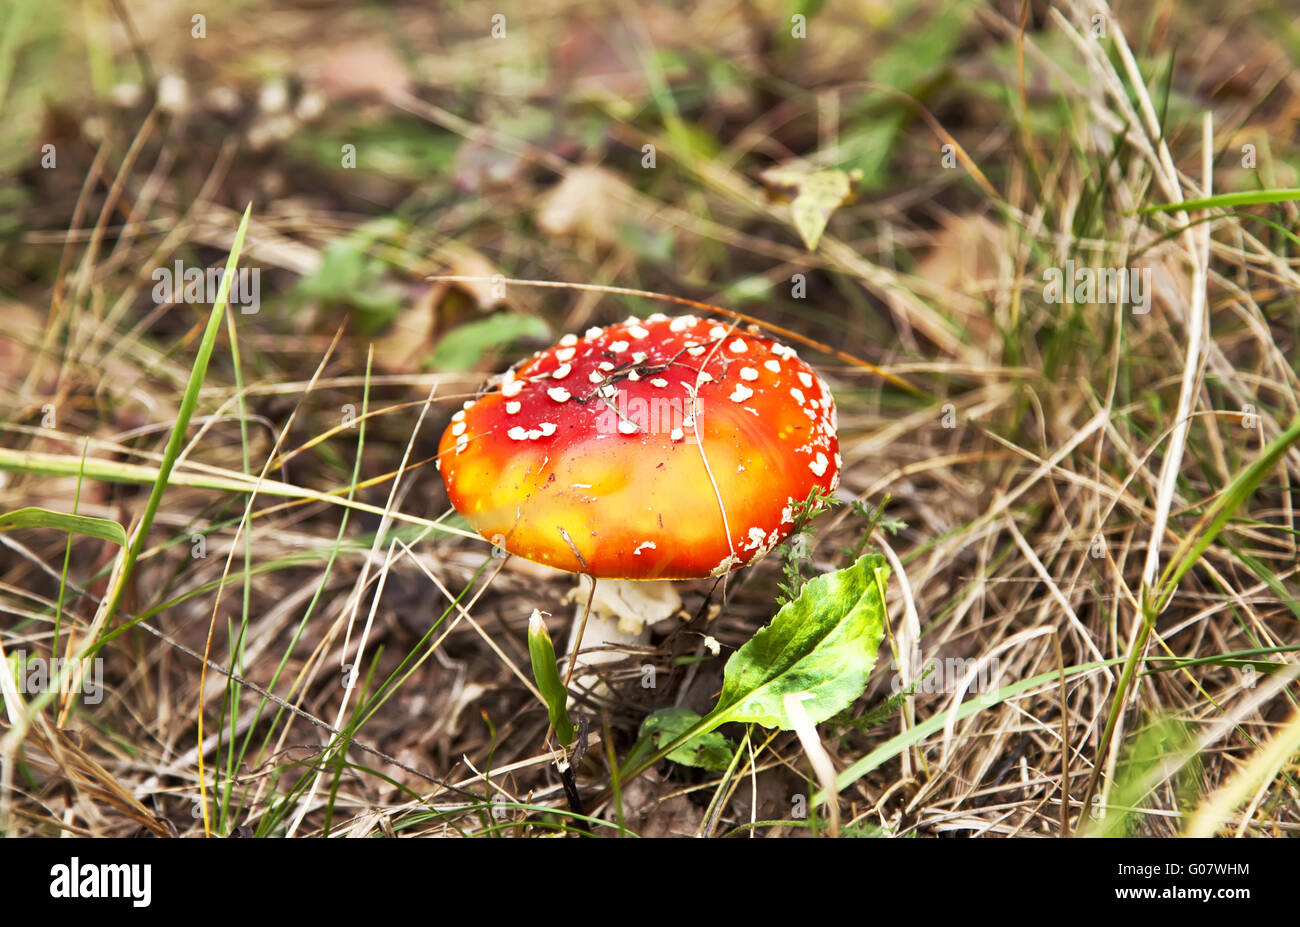 Little red fly-agaric mushroom in autumn forest Stock Photo